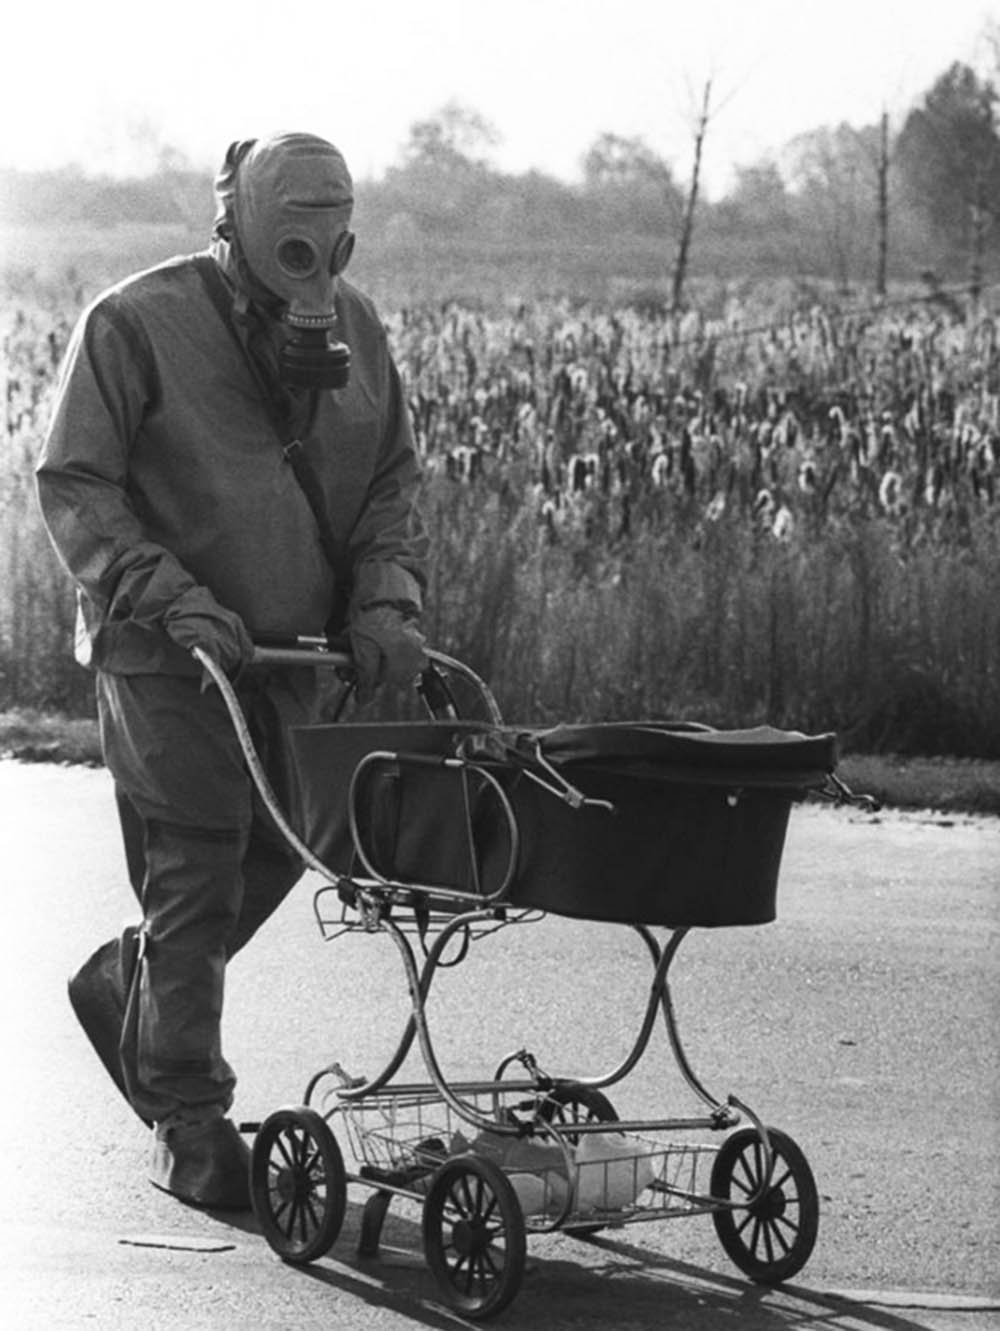 A Chernobyl liquidator pushes a baby in a carriage who was ...